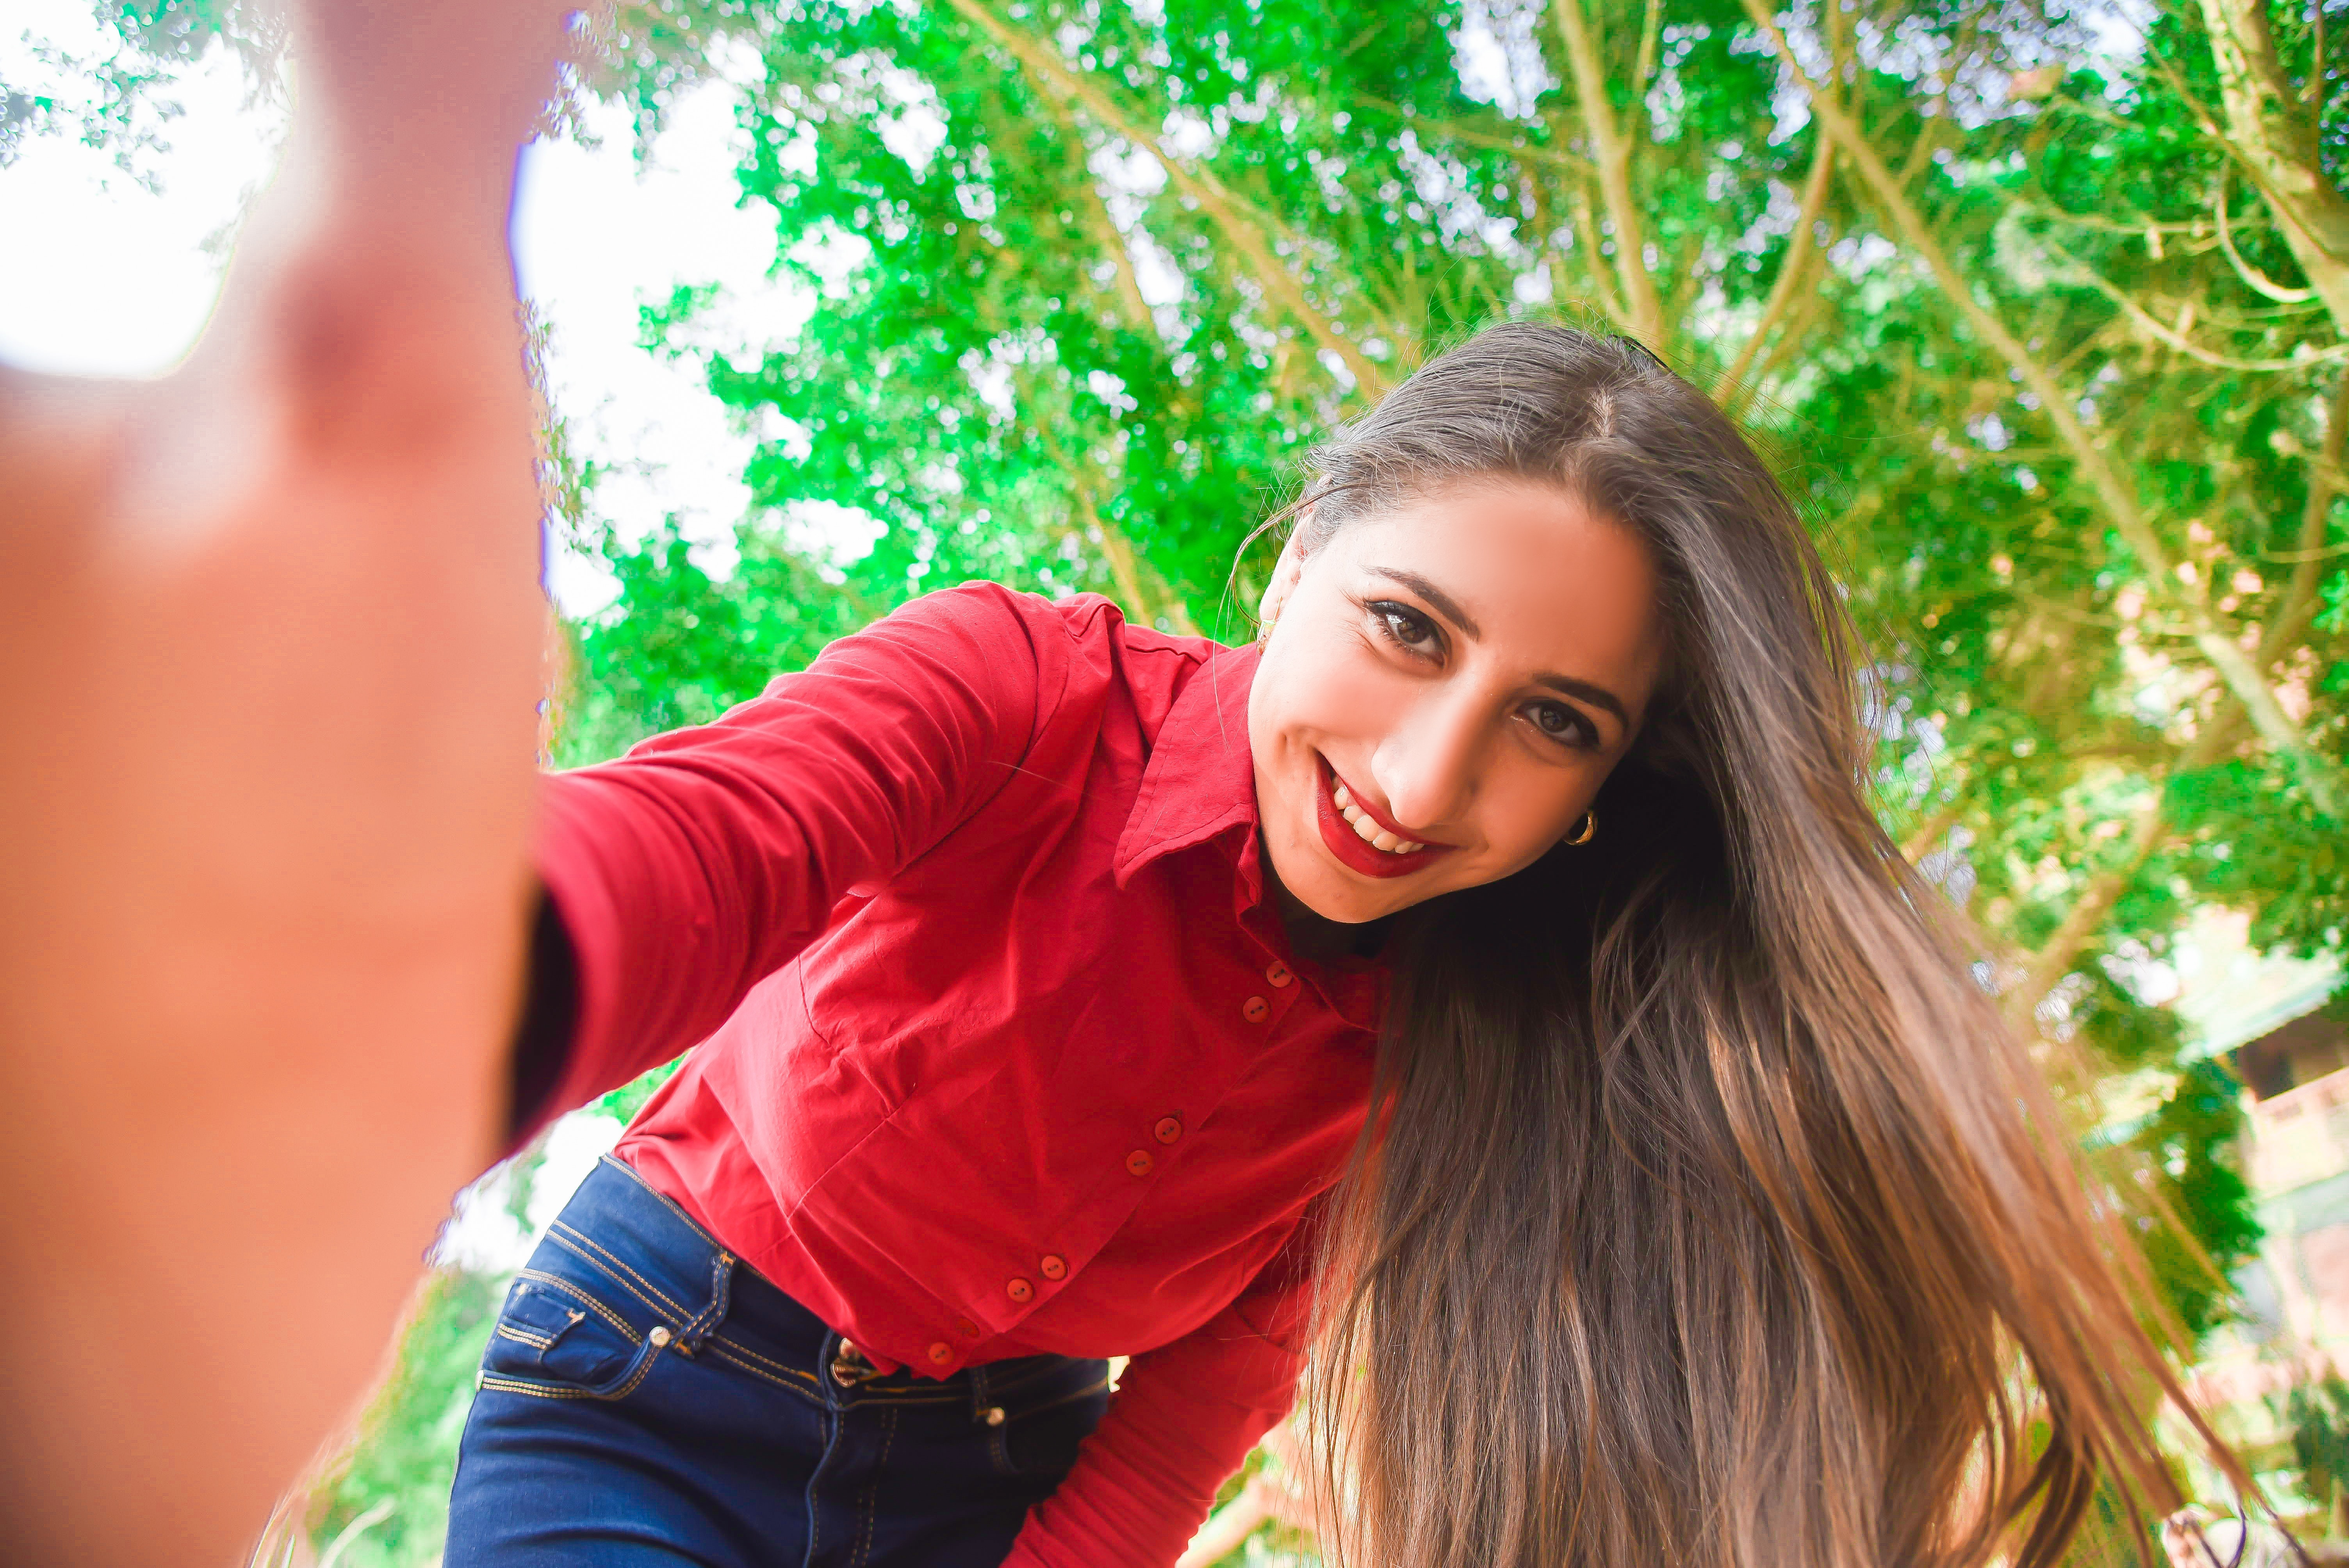 Smiling woman in red shirt and blue jeans taking selfie under green leaved tree photo